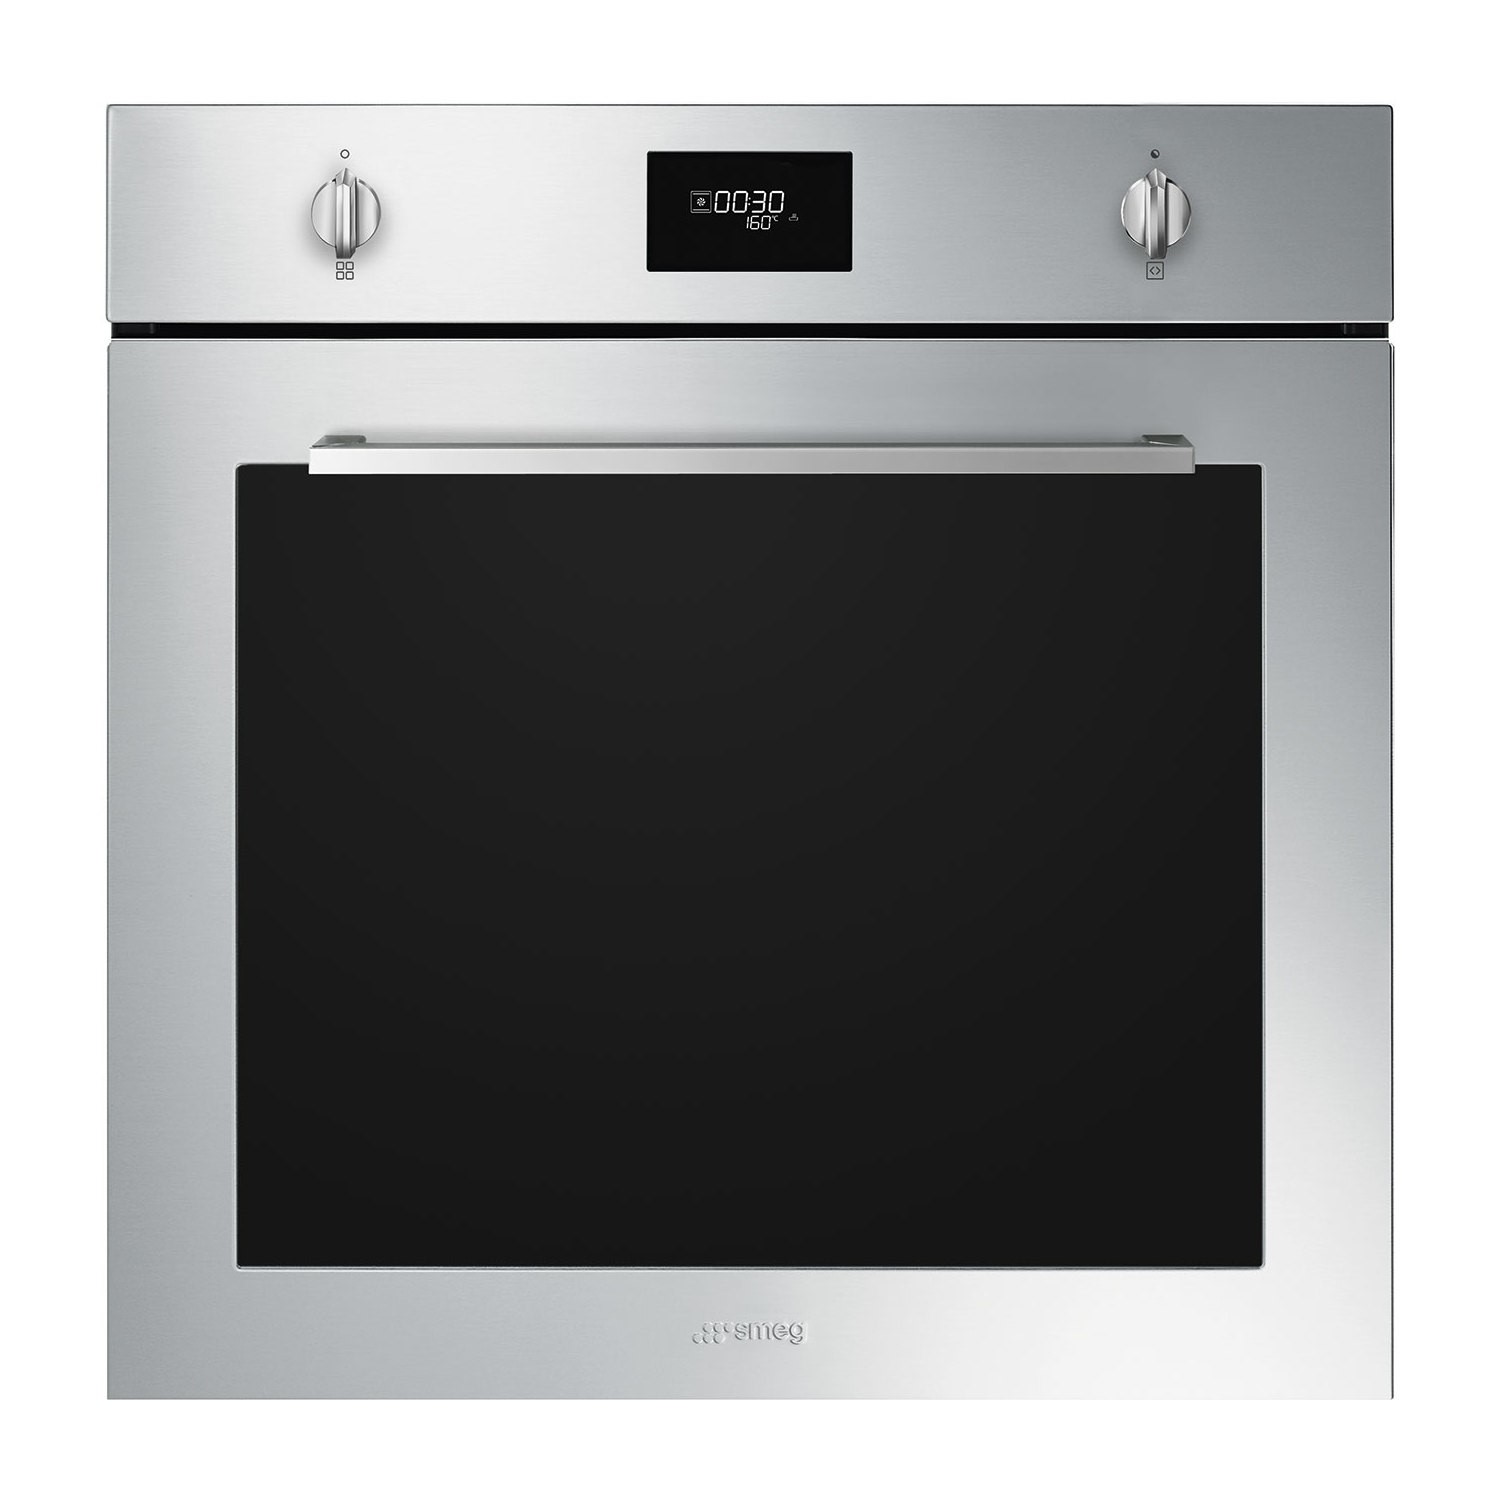 Refurbished Smeg Cucina SFP6401TVX1 60cm Single Built In Electric Oven Stainless Steel